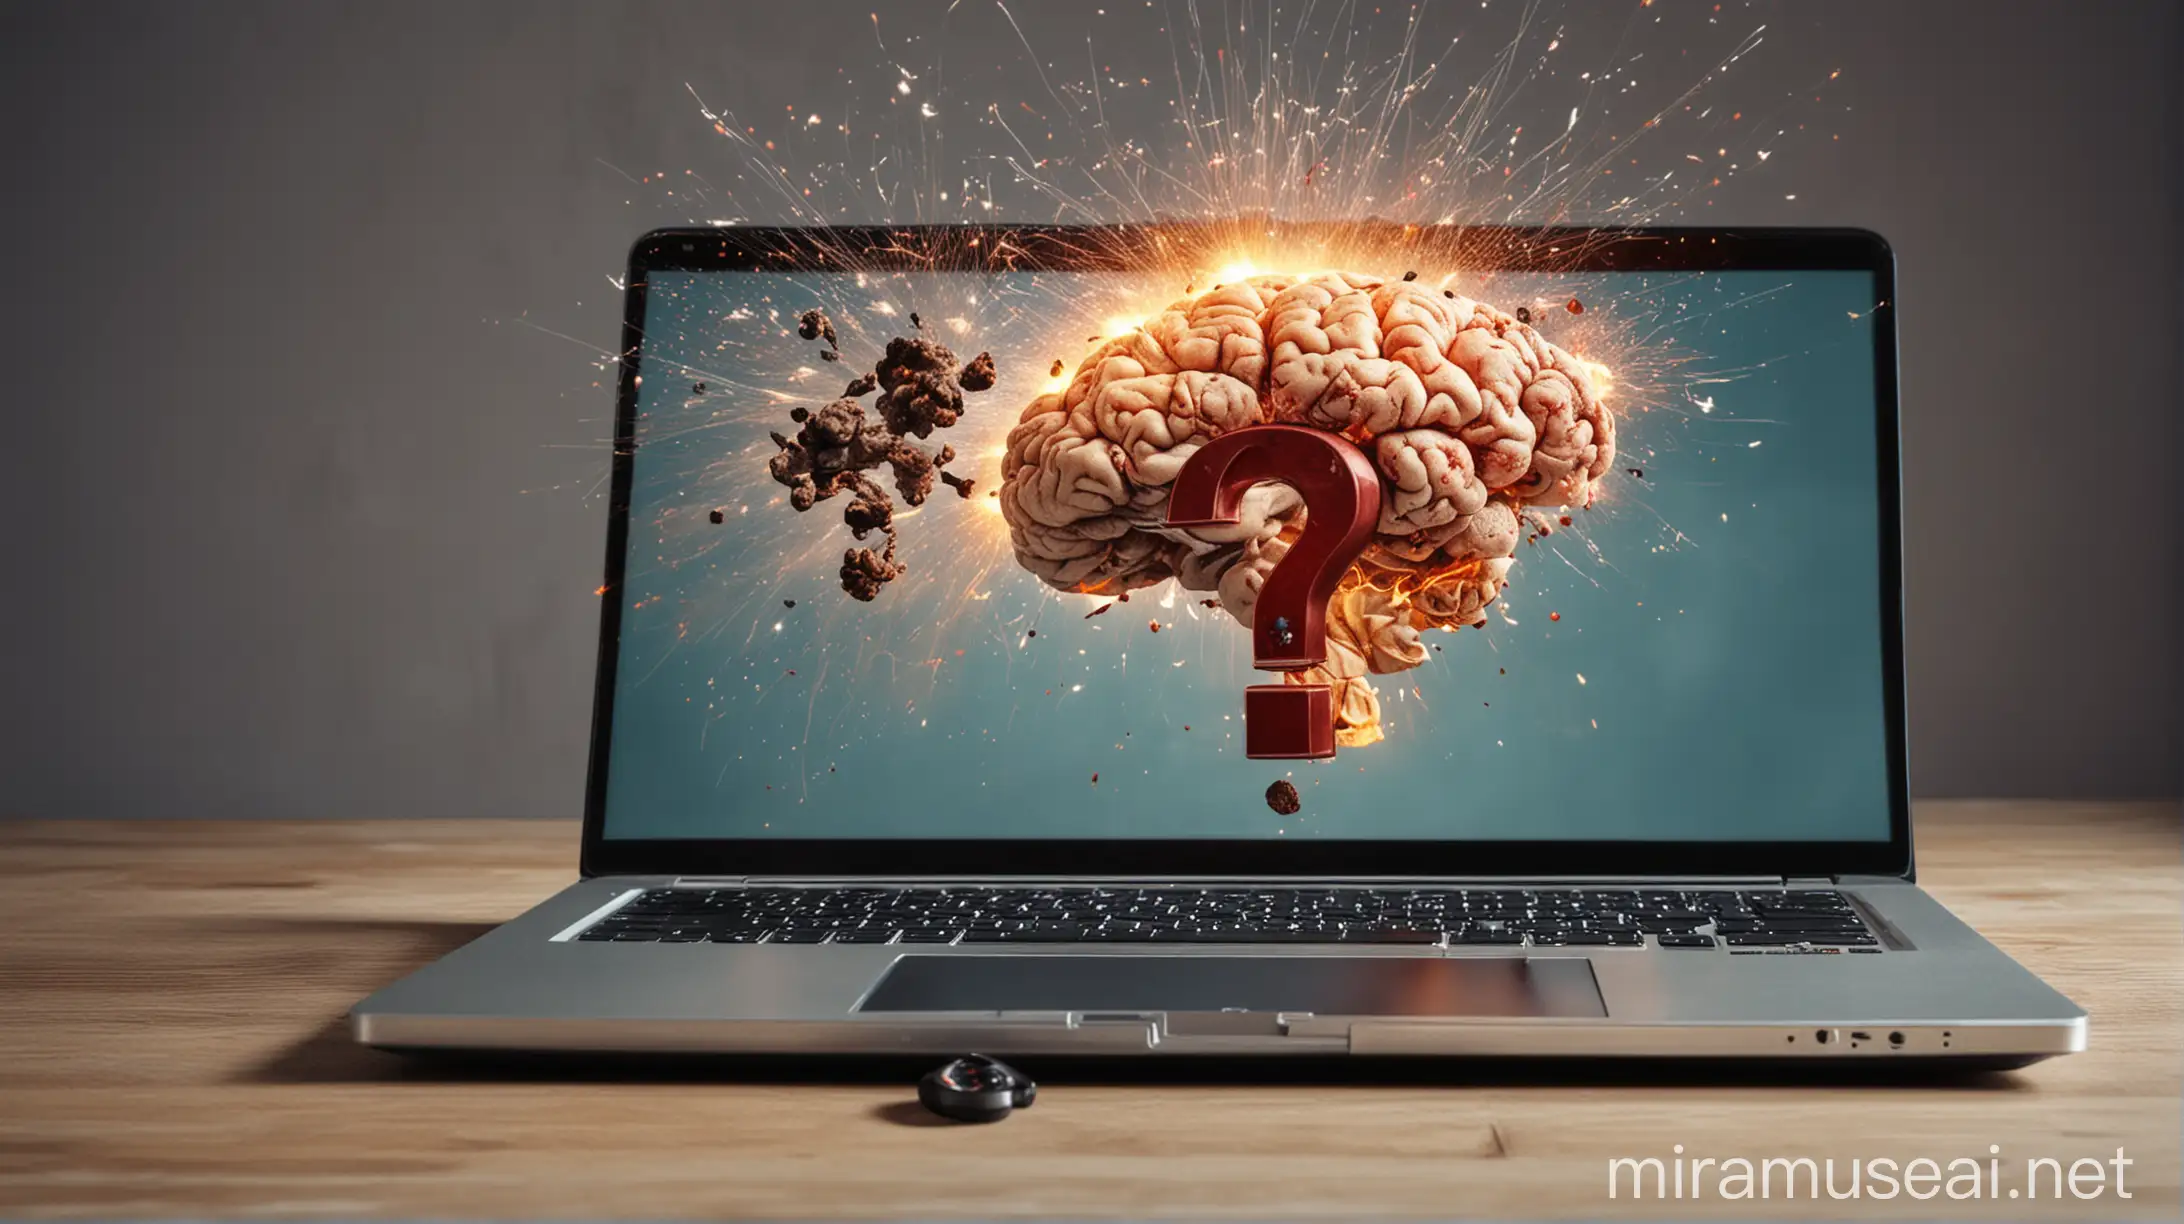 there is a laptop on the desk in the office, the laptop shows a question mark and an exploding brain